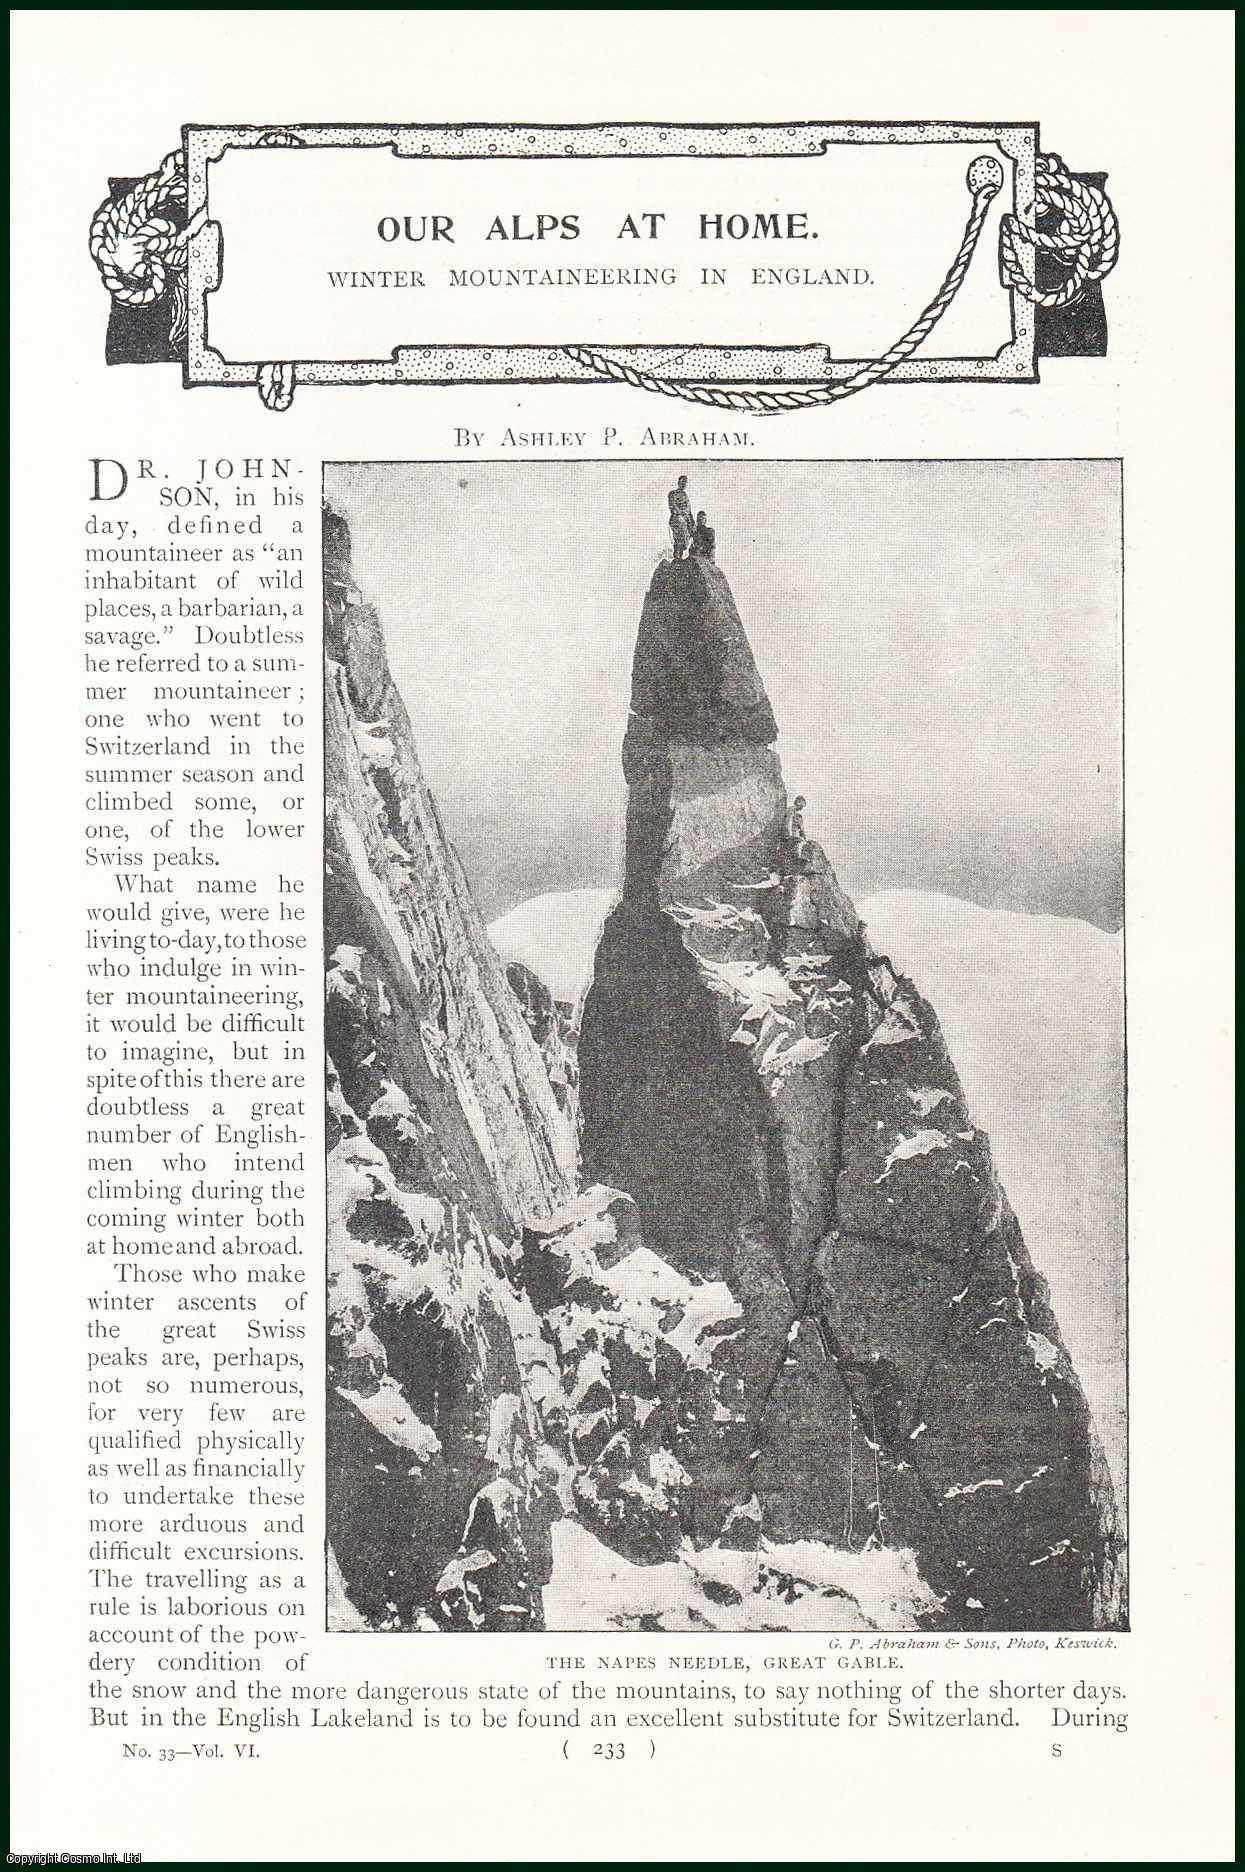 Ashley P. Abraham - The Arrowhead Arete, Great Gable ; Top Of The Needle Ridge, Great Gable ; Top Of Central Gully, Great End ; Scawfell Pinnacle & Deep Ghyll & more : Our Alps at Home. Winter Mountaineering in England. An uncommon original article from the Harmsworth London Magazine, 1901.